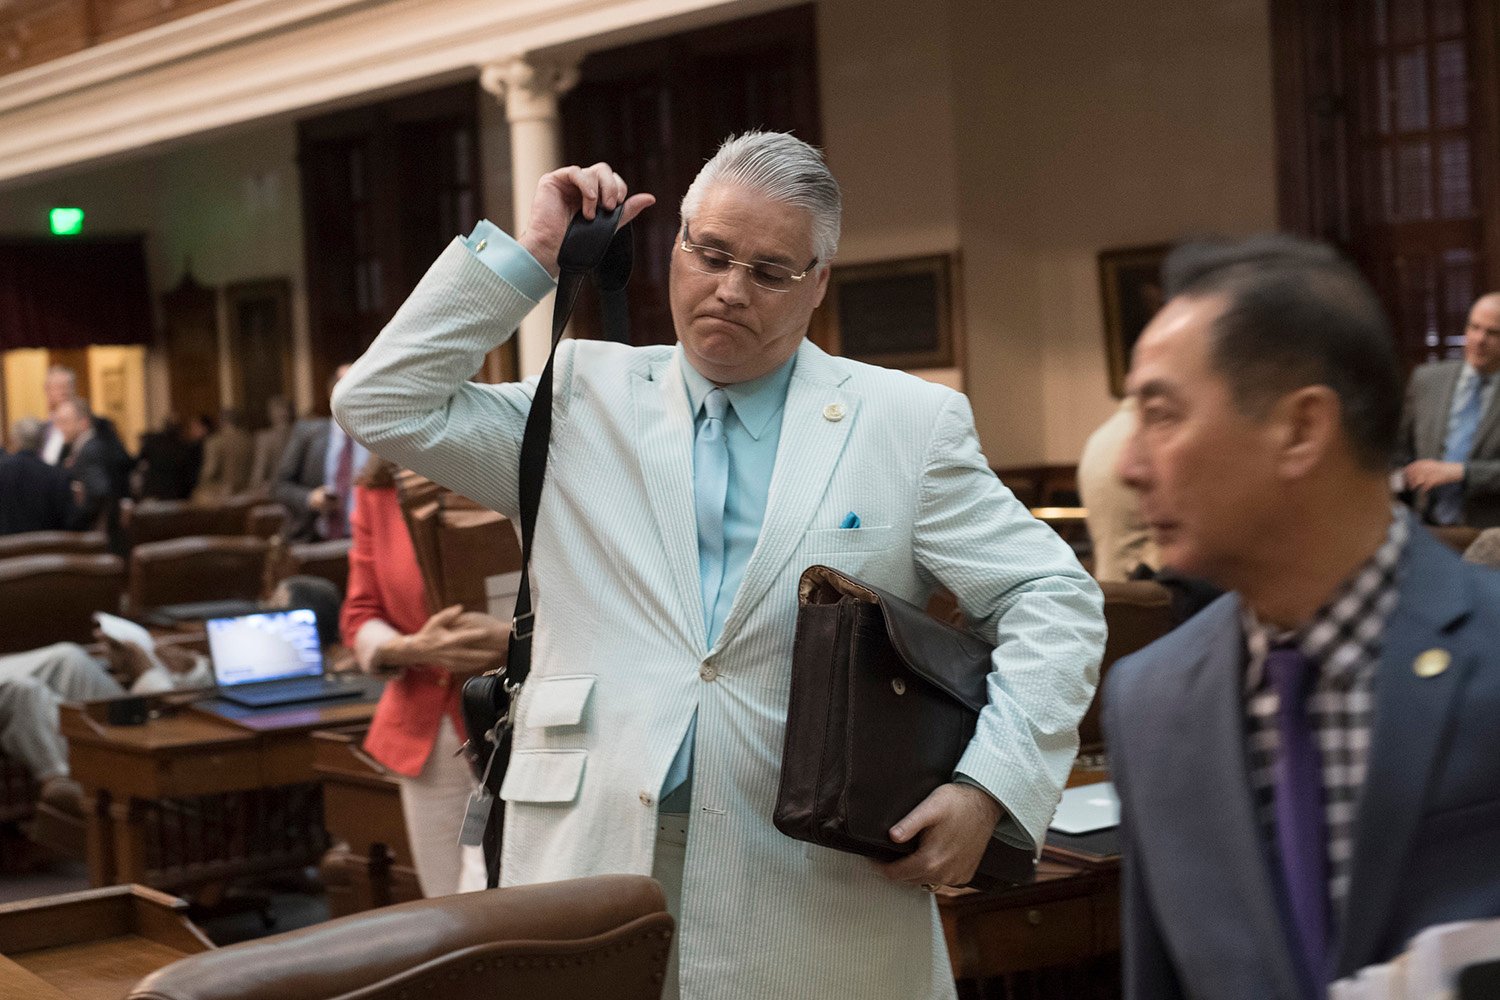 12:02 a.m. State Rep. Dan Huberty, R-Houston, prepares to leave the House after the midnight deadline passes. As promised, the Texas Freedom Caucus killed over 100 local and consent bills later that Friday.